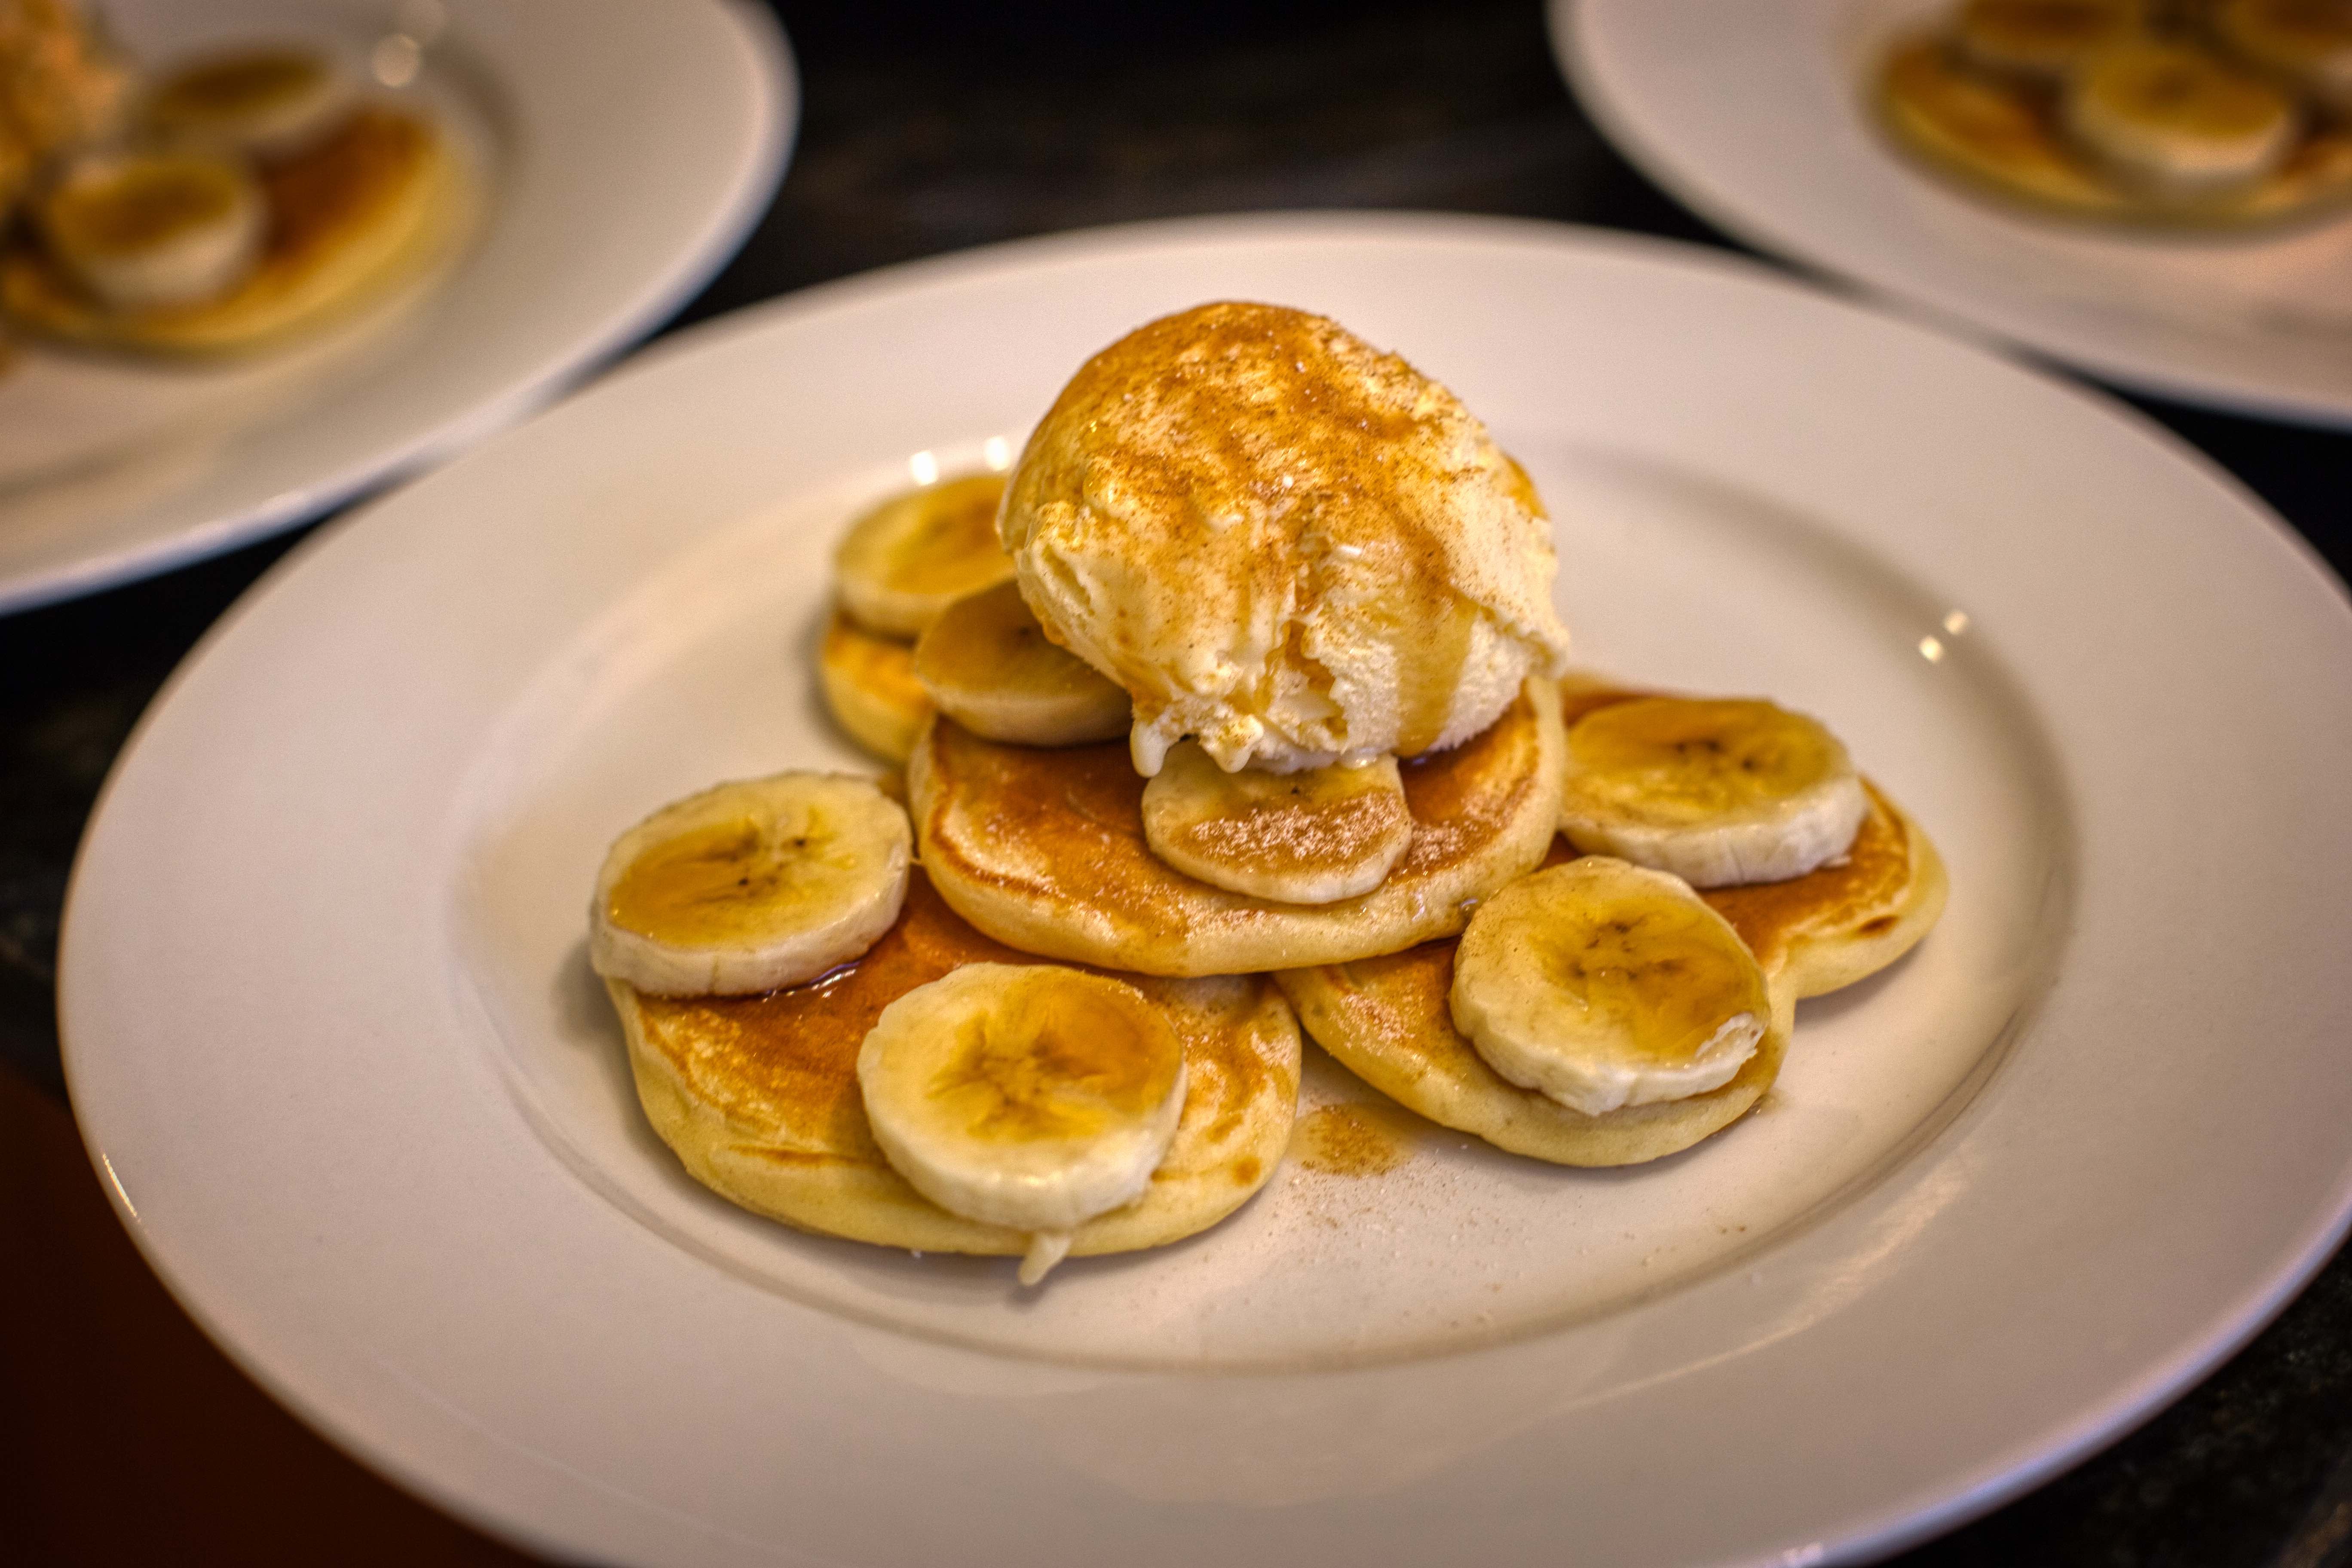 Pancakes with sliced banana, a blob of vanilla ice-cream, maple syrup and sprinkled with cinnamon